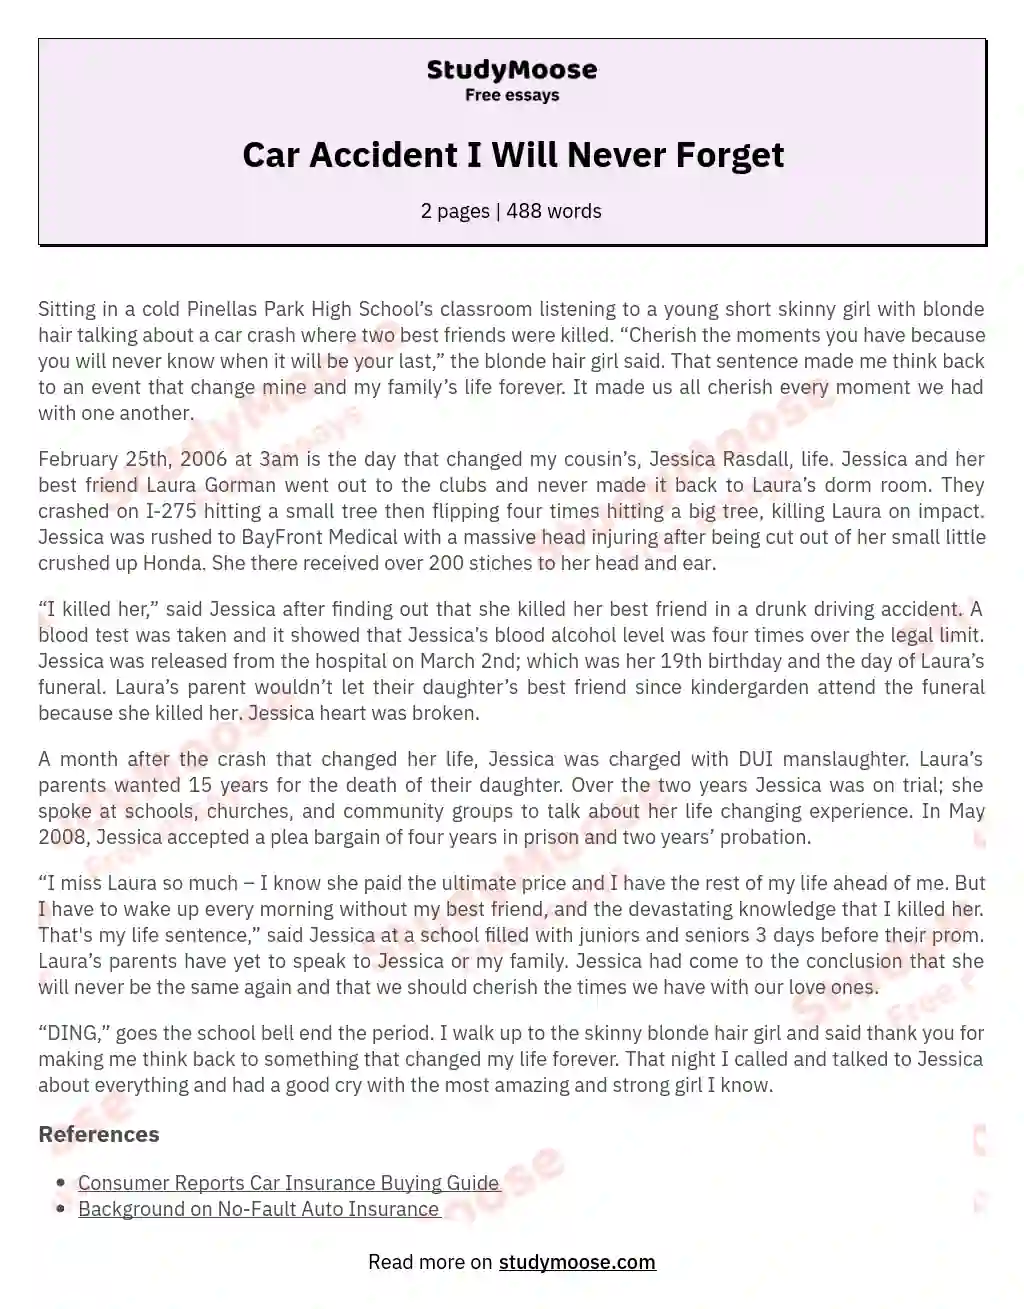 Car Accident I Will Never Forget